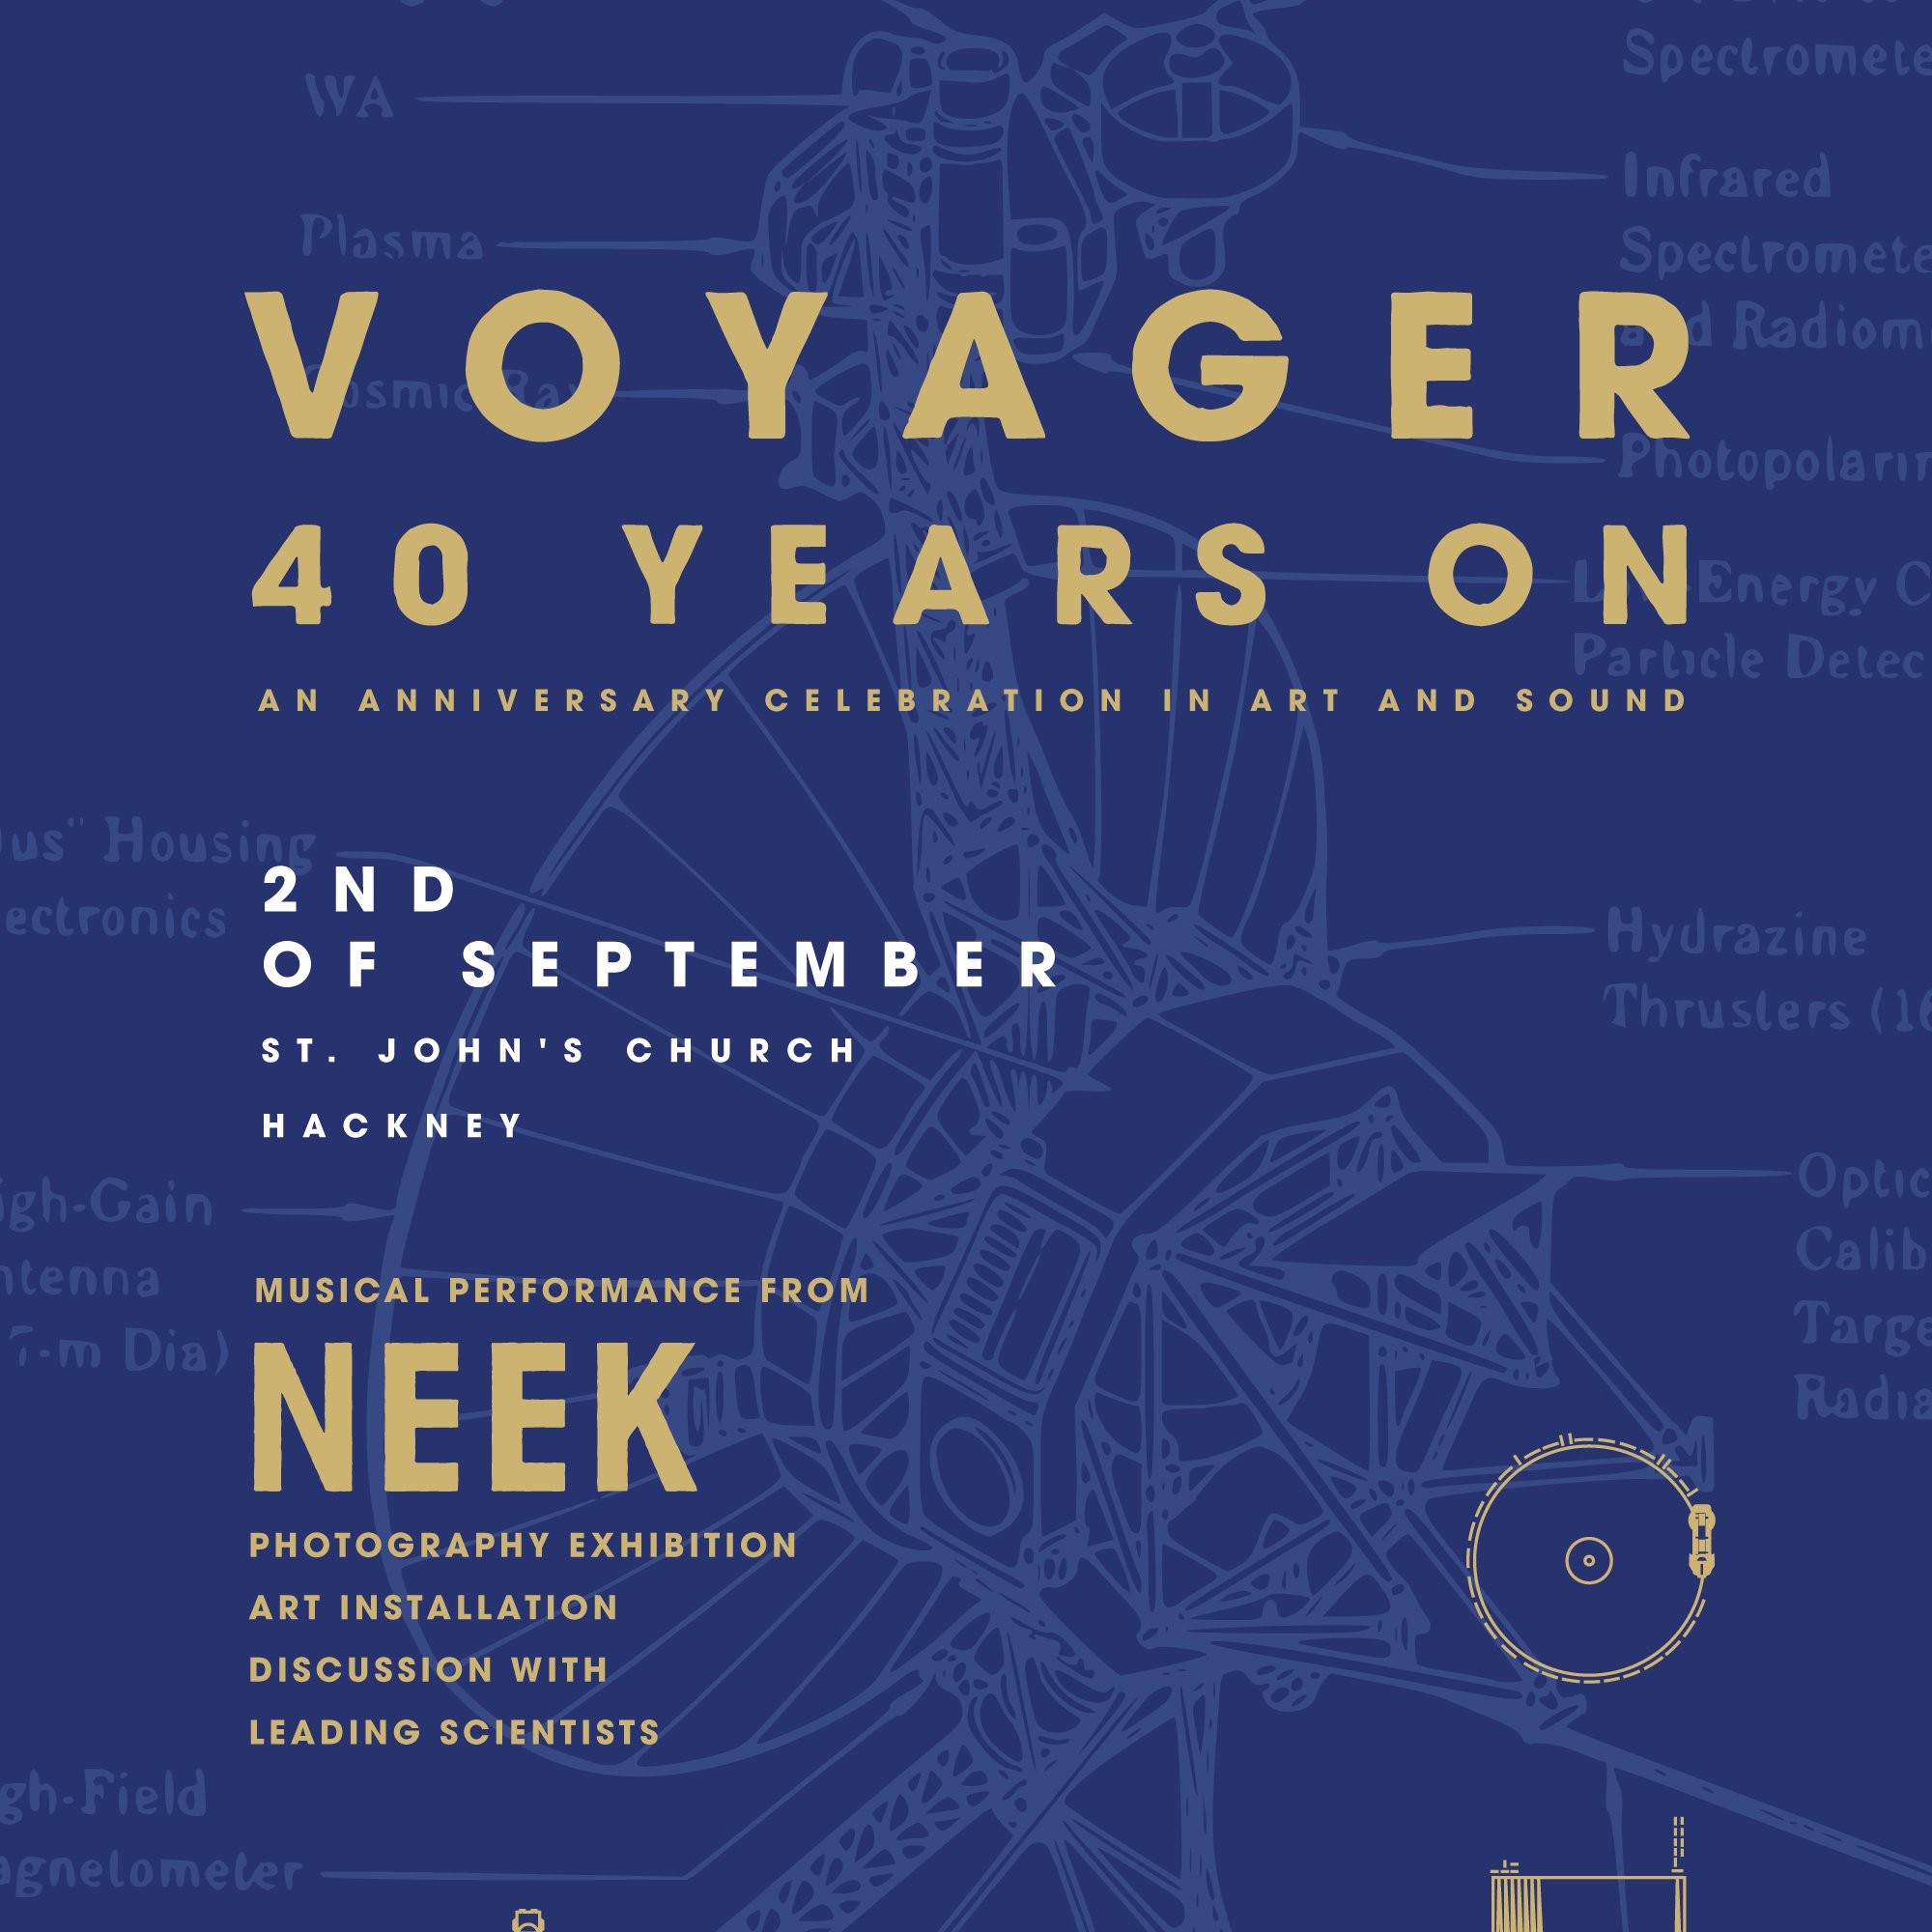 Musicians, Scientists & Artists congregate to celebrate NASA's Voyager 40 years on. Saturday 2nd Sept, London #Voyager40 
🌎                  🛰✨